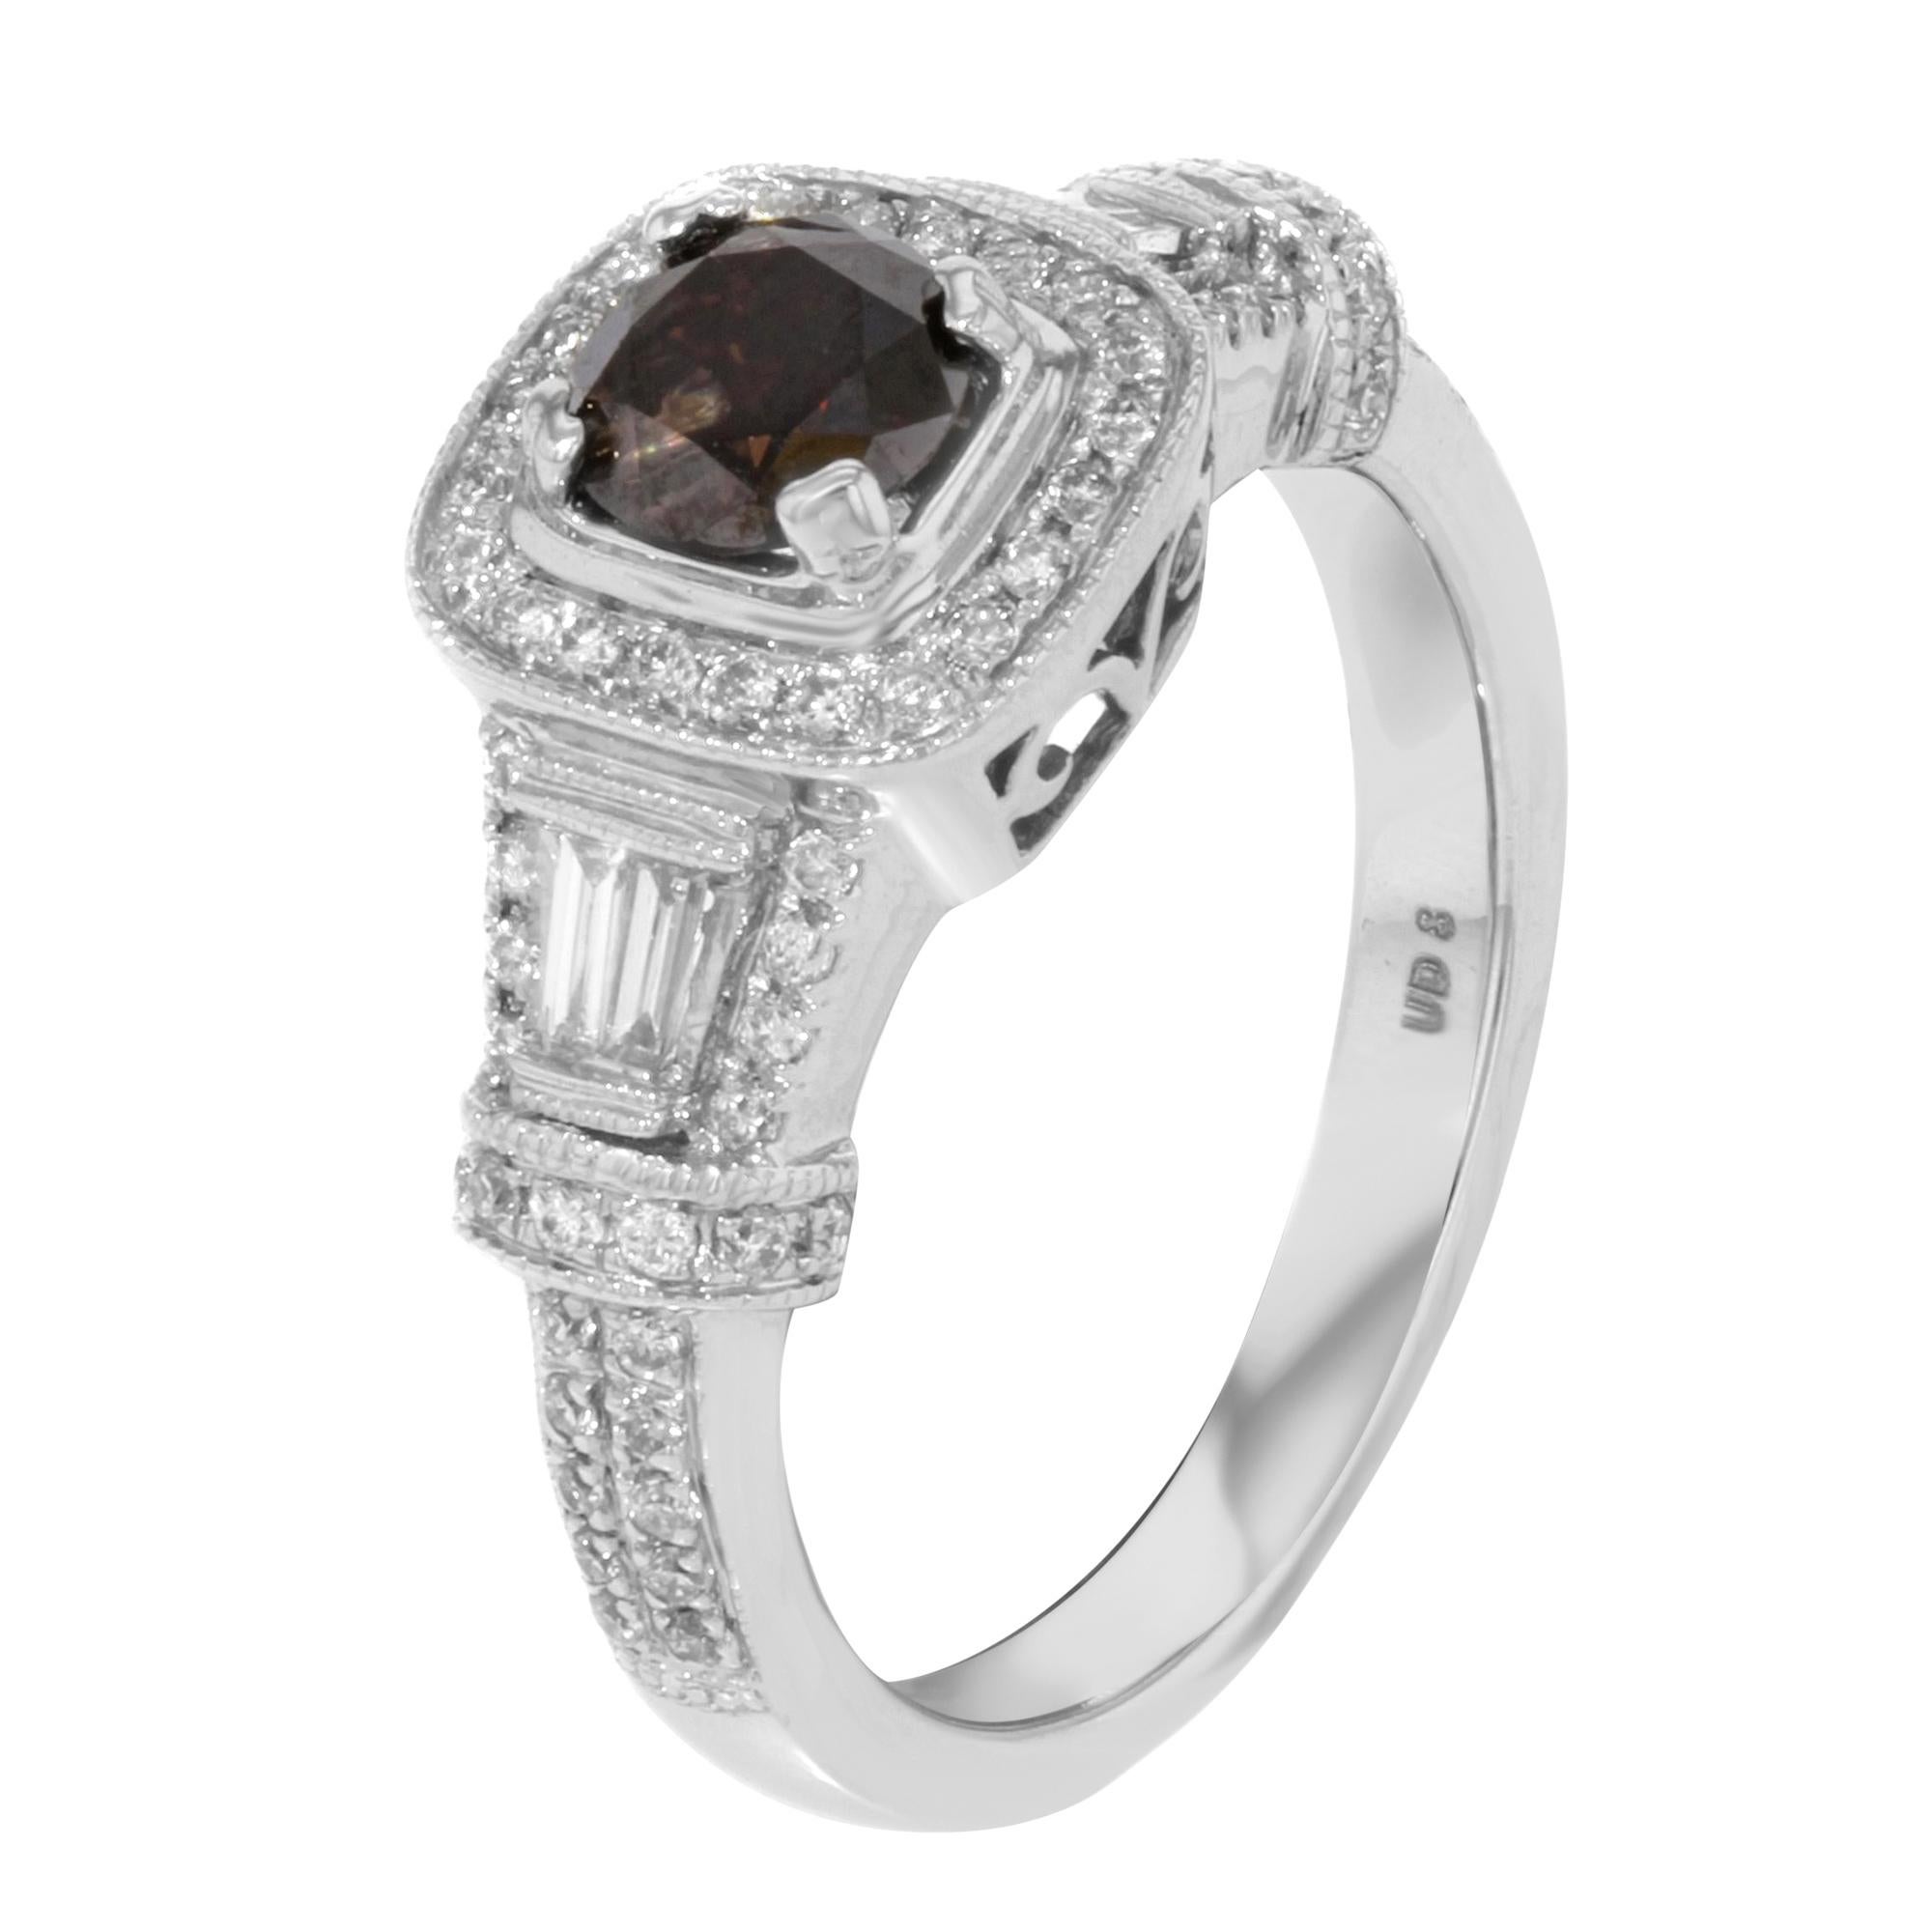 Round Cut Brown Diamond Accented Ladies Engagement Ring 14K White Gold 1.84 Cttw For Sale